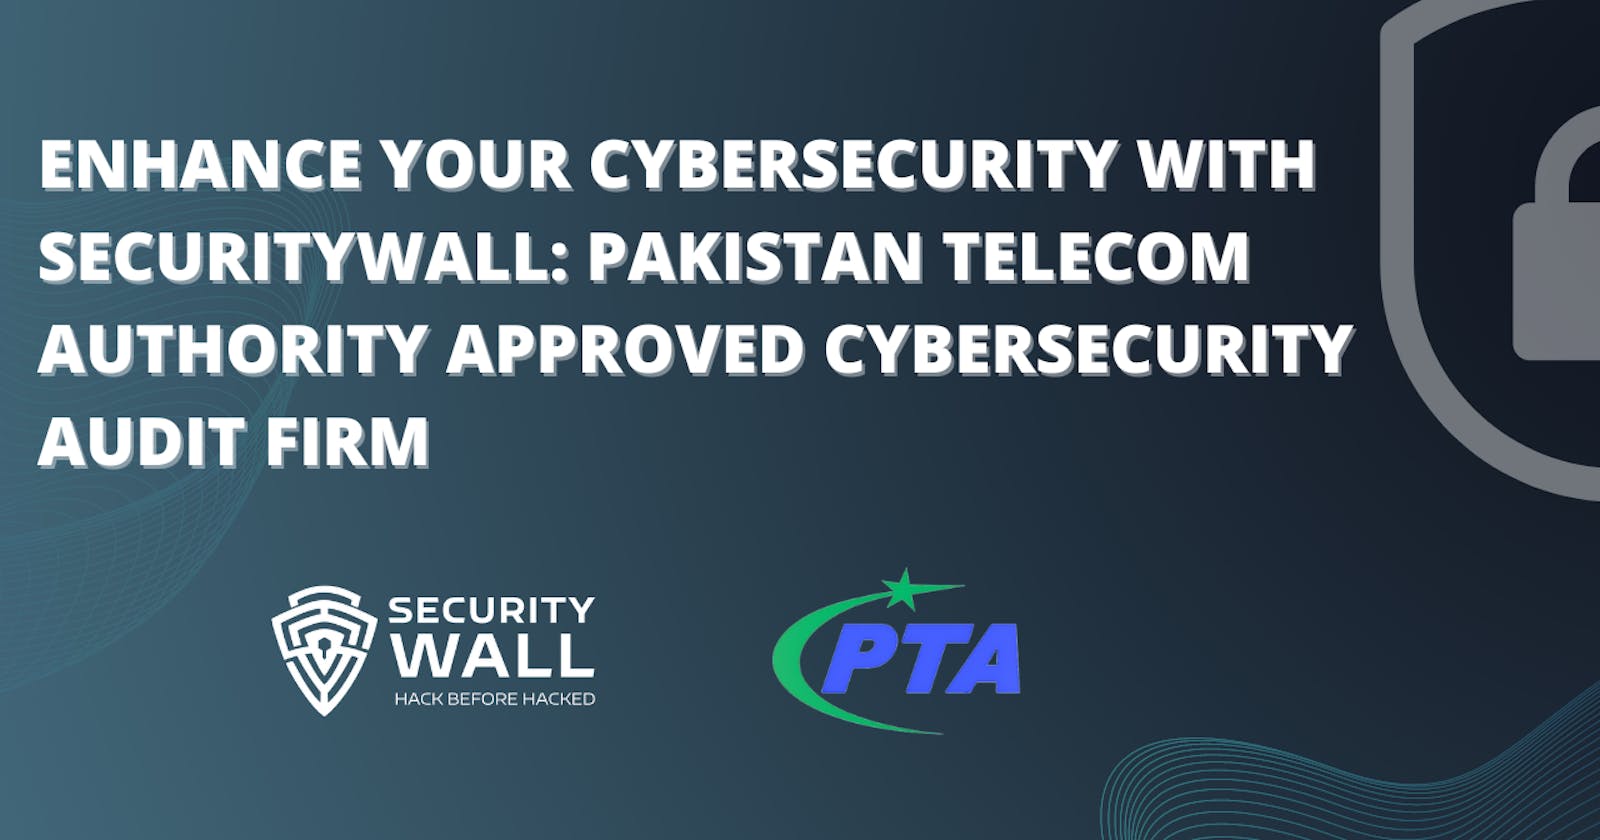 Enhance Your Cybersecurity with SecurityWall: Pakistan Telecom Authority's Approved Cybersecurity Audit Firm